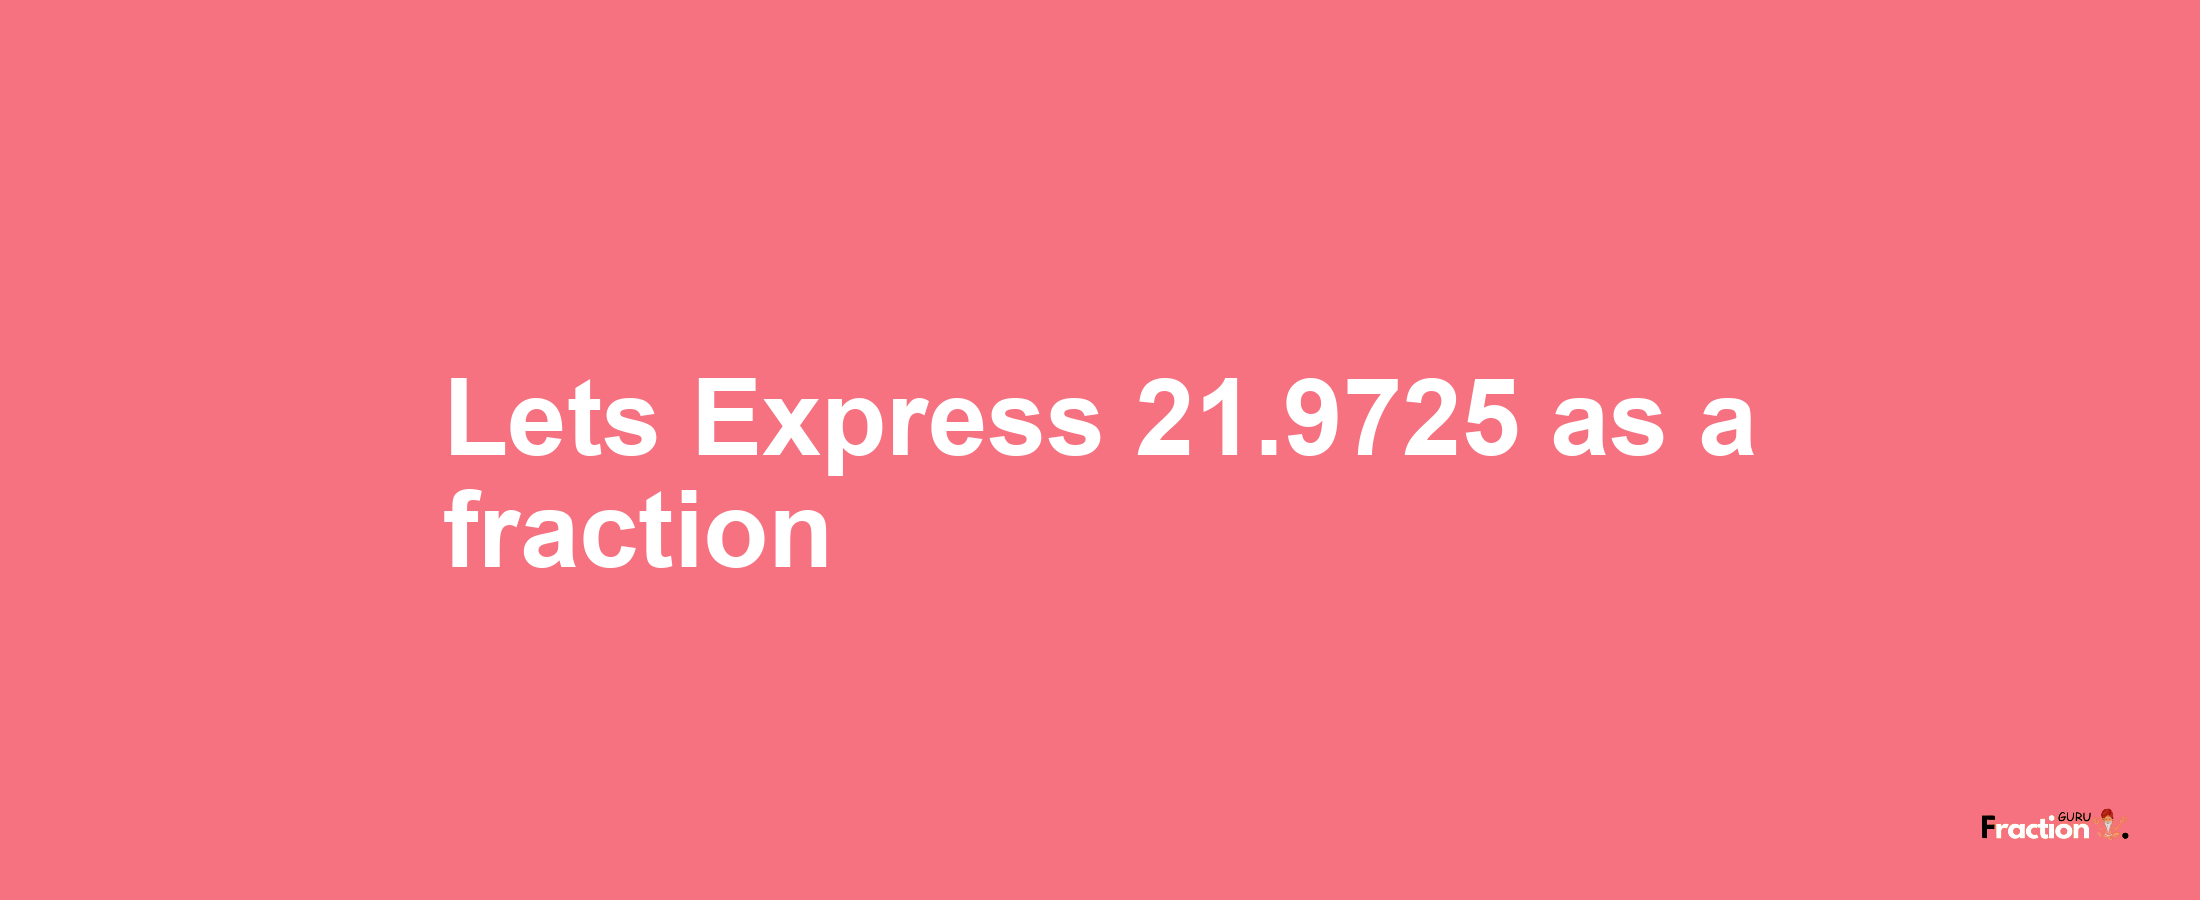 Lets Express 21.9725 as afraction